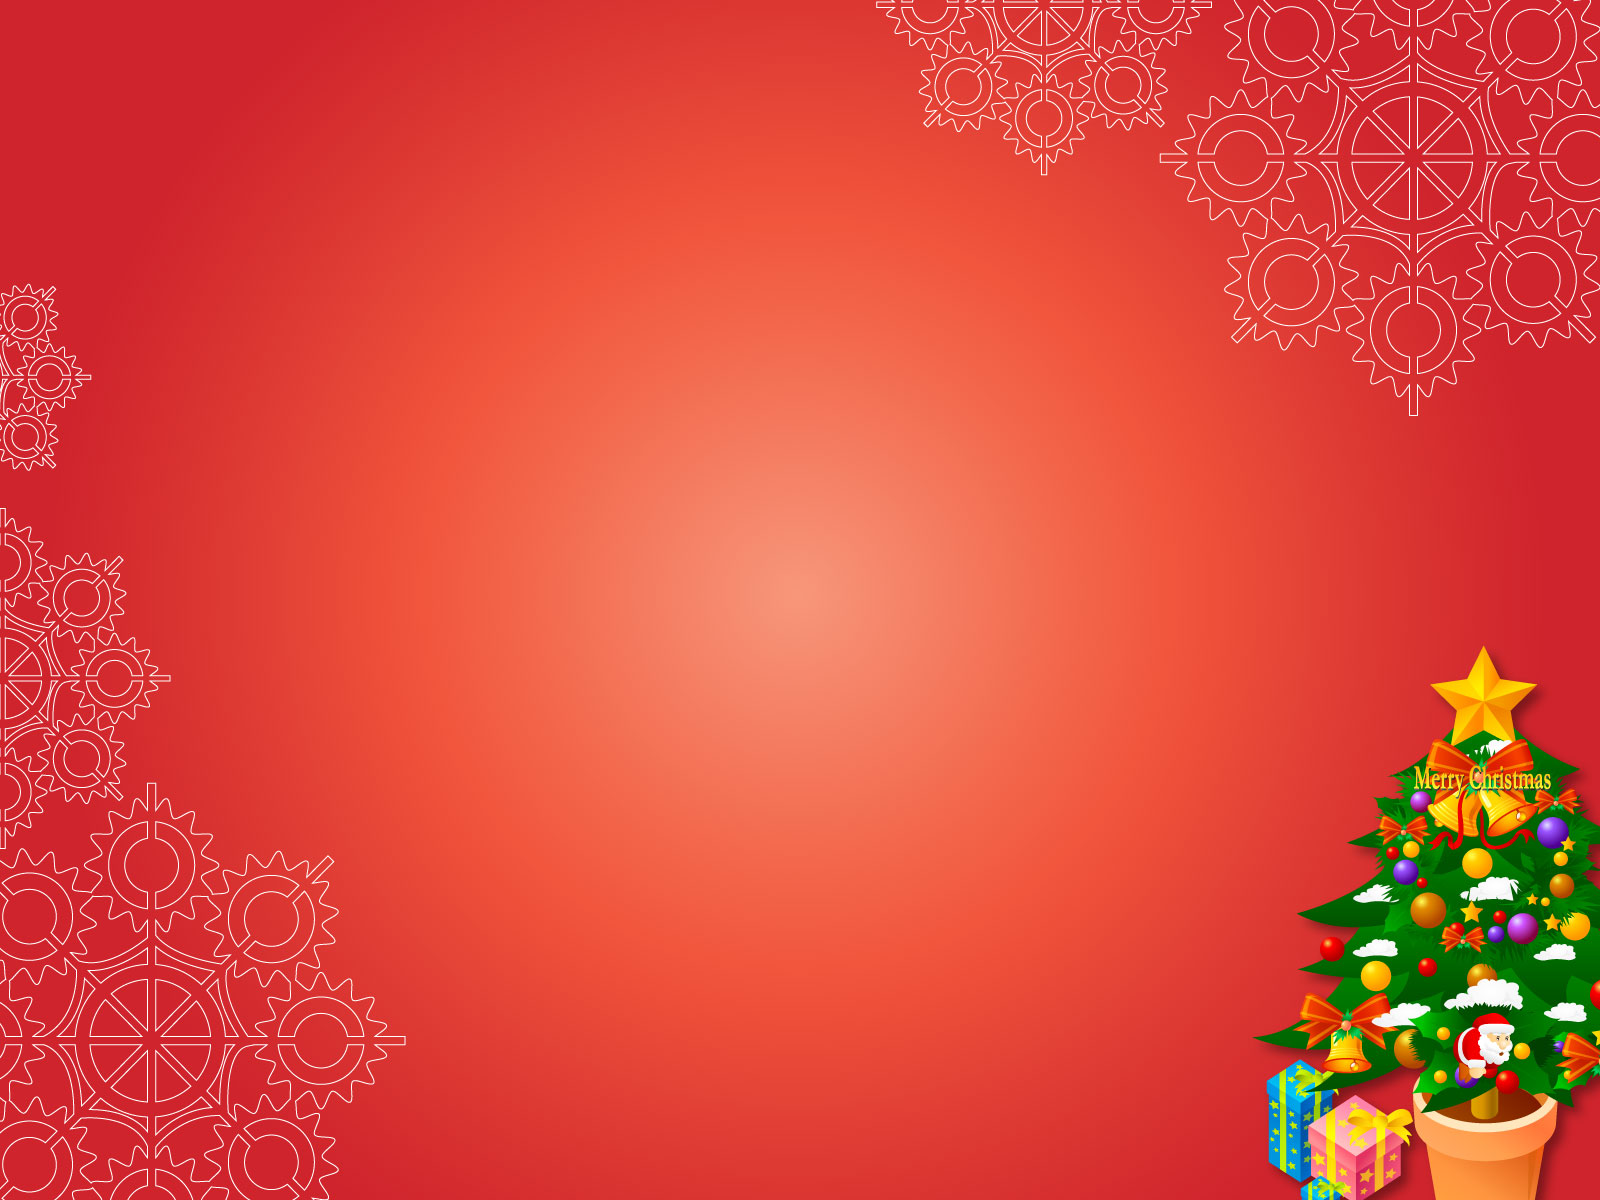 ... Card & Wallpapers Free: Christmas Wallpaper Stripes Stars Background